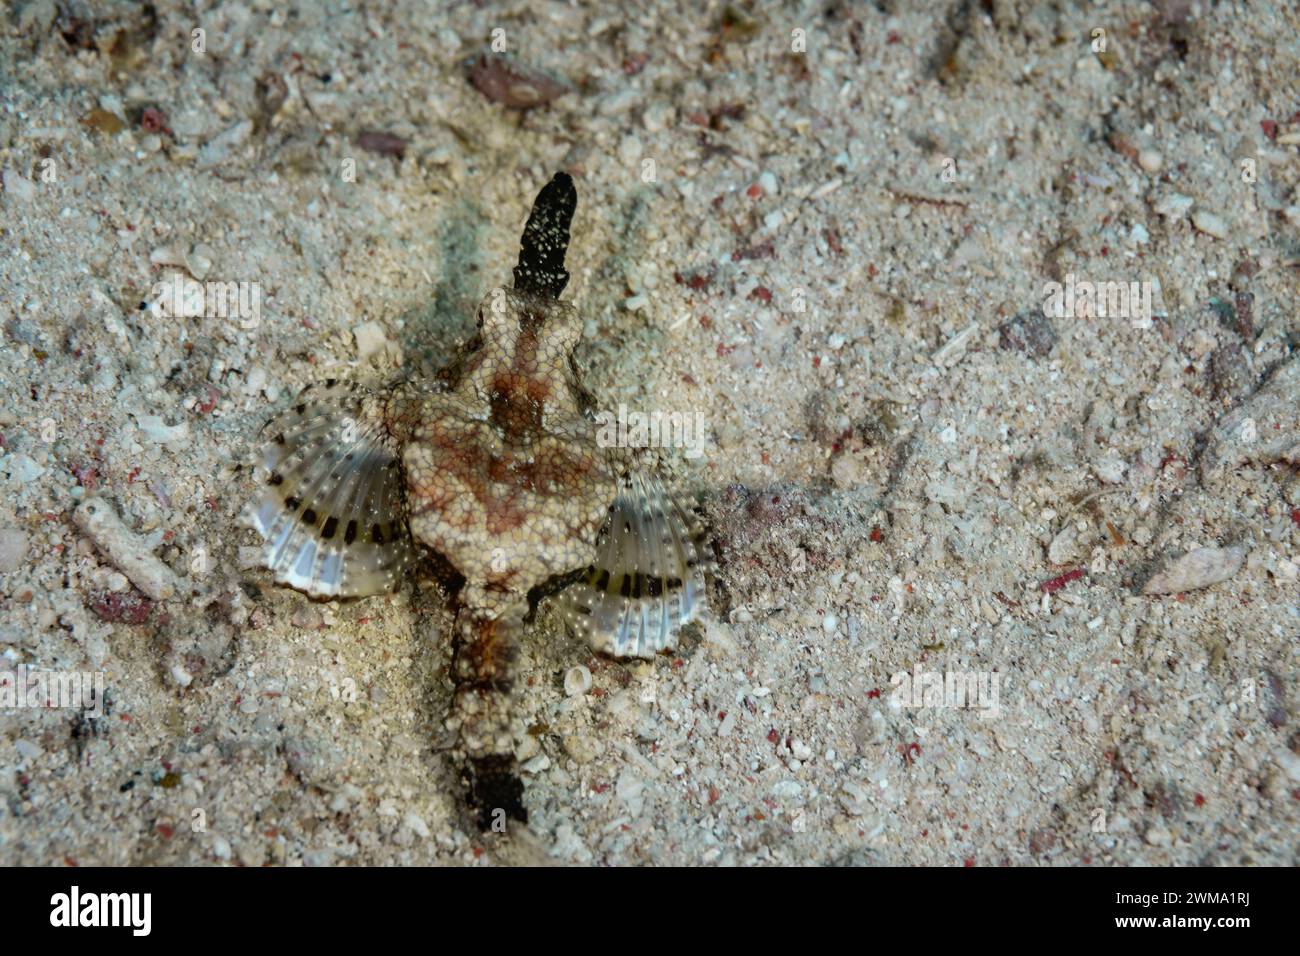 PEGASUS SEA MOTH, Eurypegasus draconis, hides with camoflauge in the sand and shells of the ocean floor Stock Photo